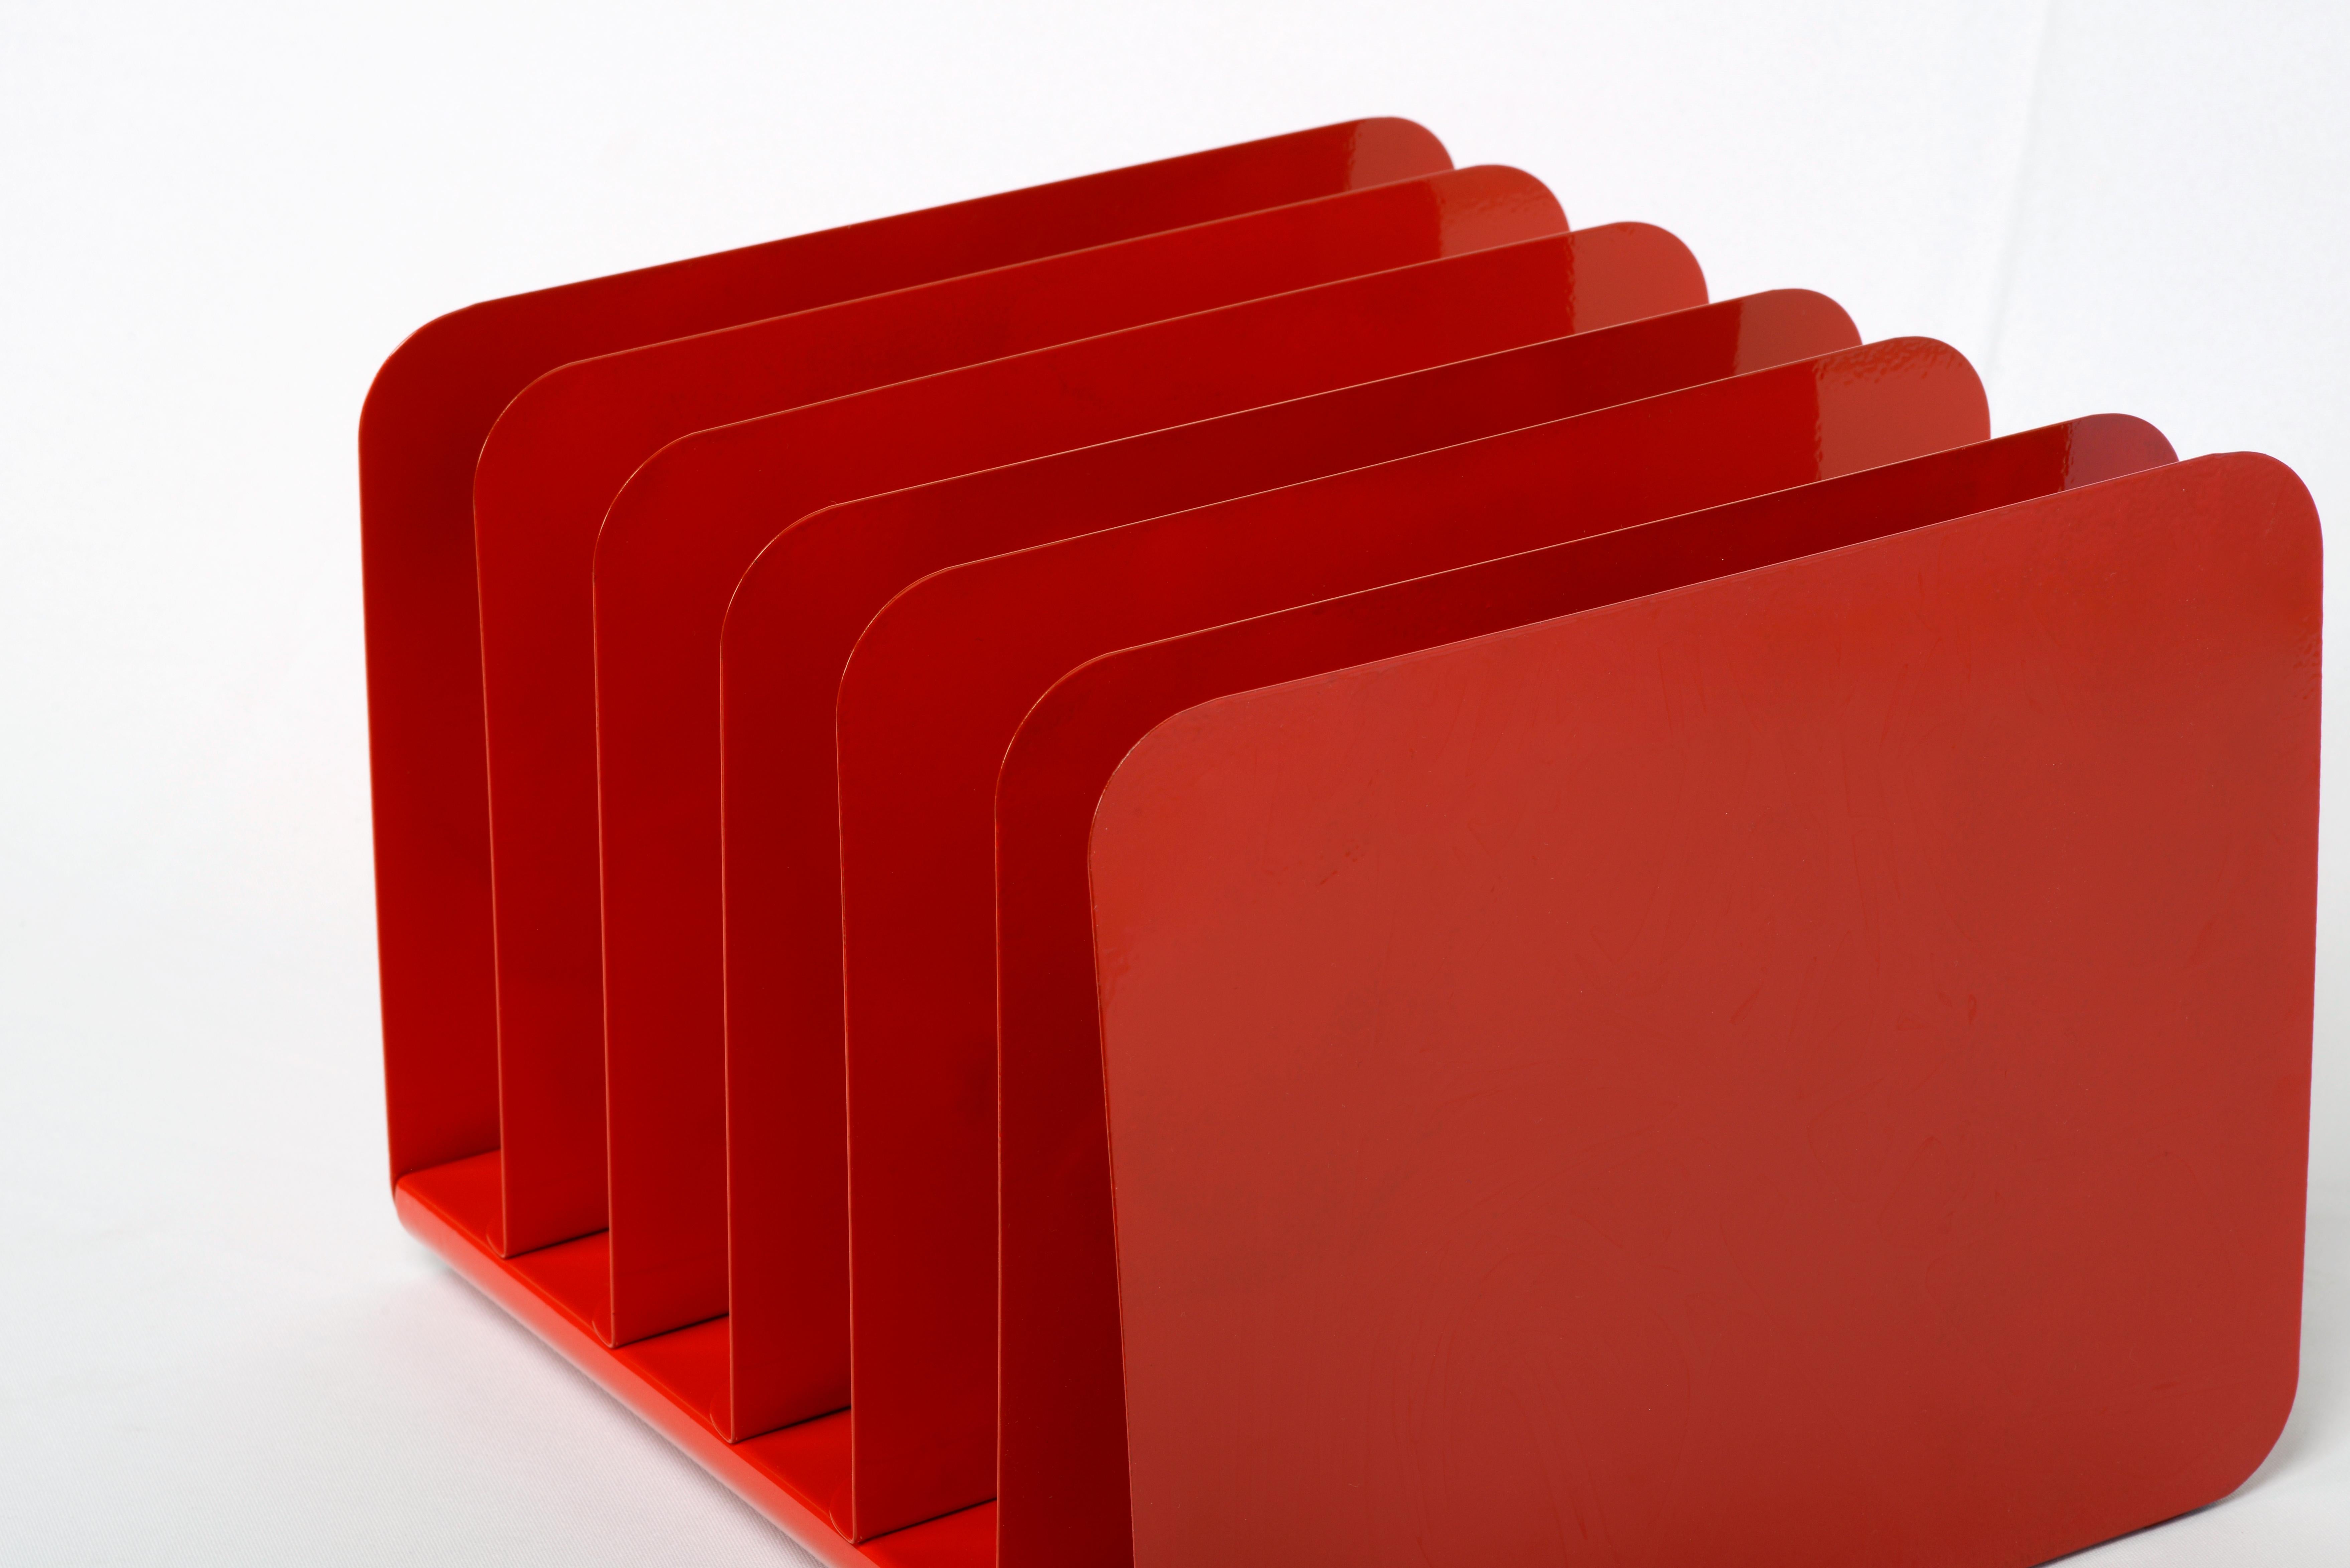 Powder-Coated 1960s Desktop File Organizer, Refinished in Red